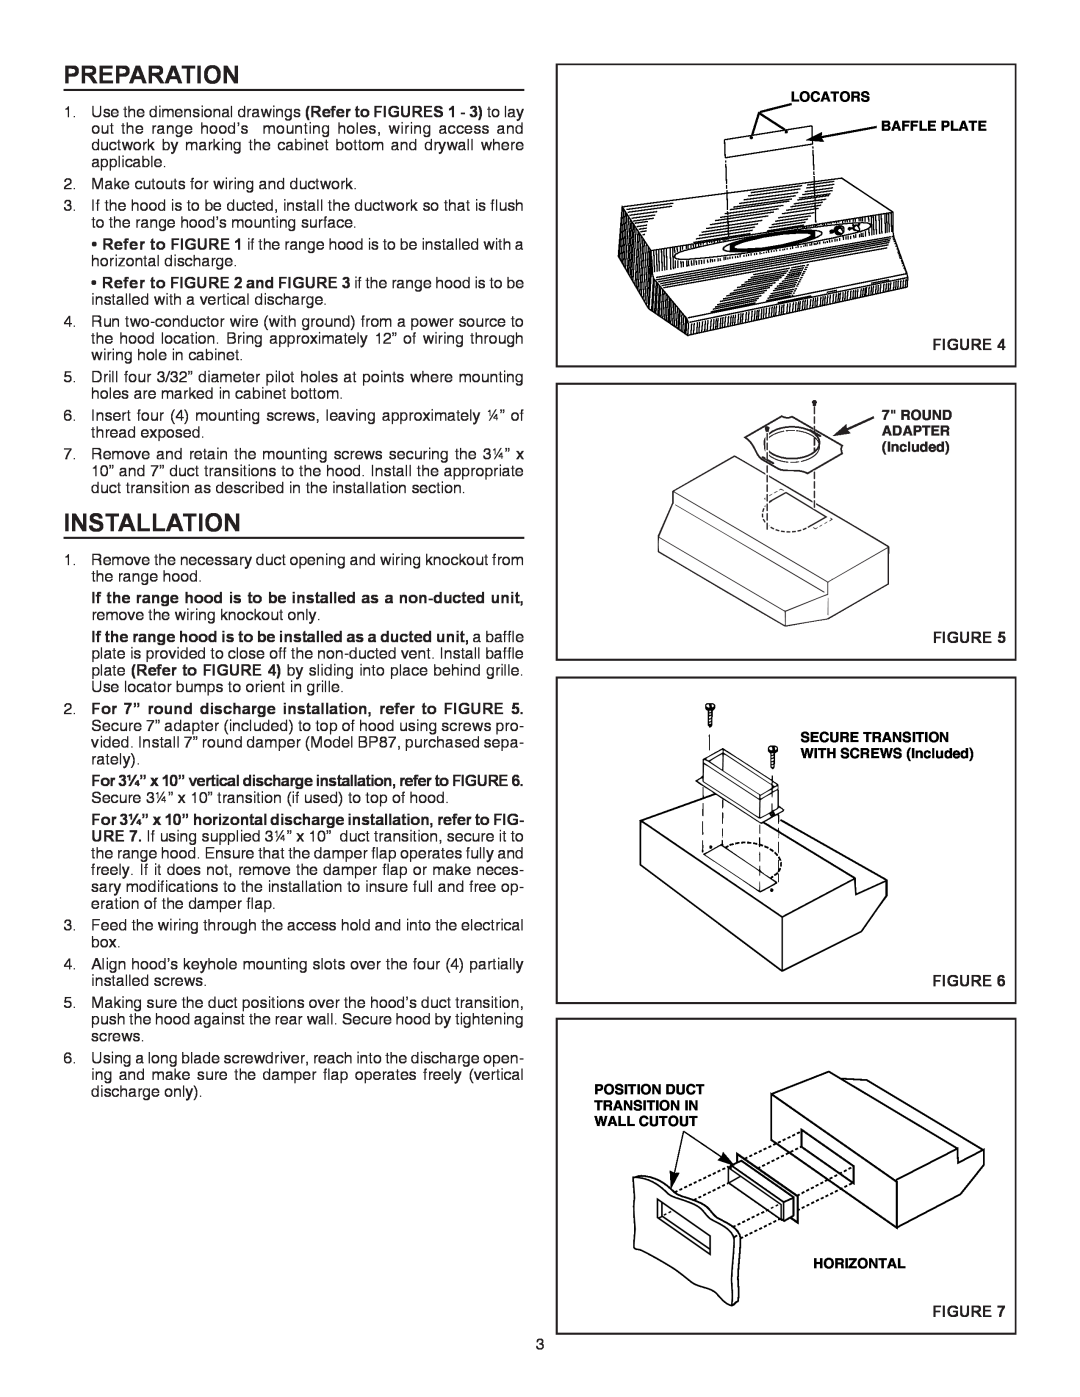 Broan QT230BL installation instructions Preparation, Installation, For 7” round discharge installation, refer to FIGURE 